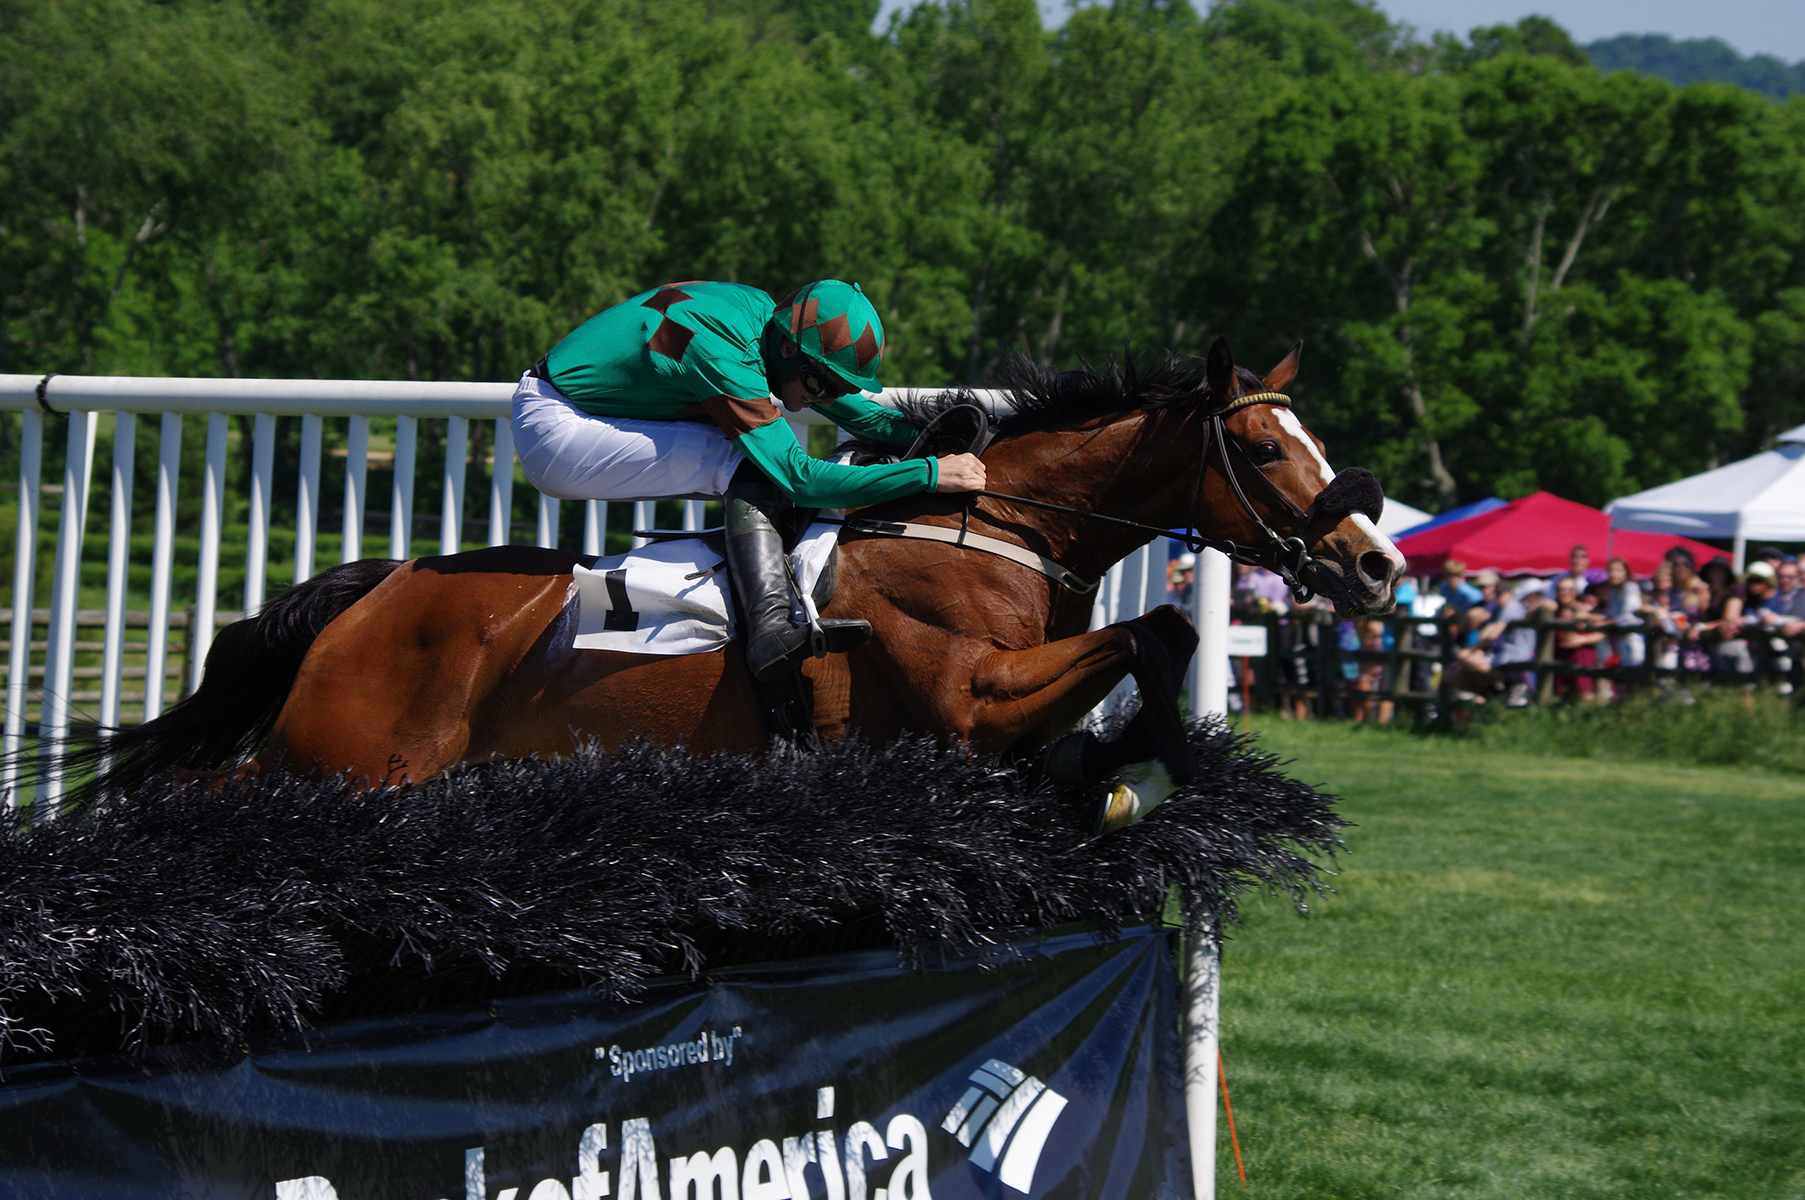 Sarah Joyce and Jack Doyle jump the last in the Margaret Currey Henley Hurdle on Iroquois Steeplechase day in Nashville, Tennessee. Photo: Meghan Janusz